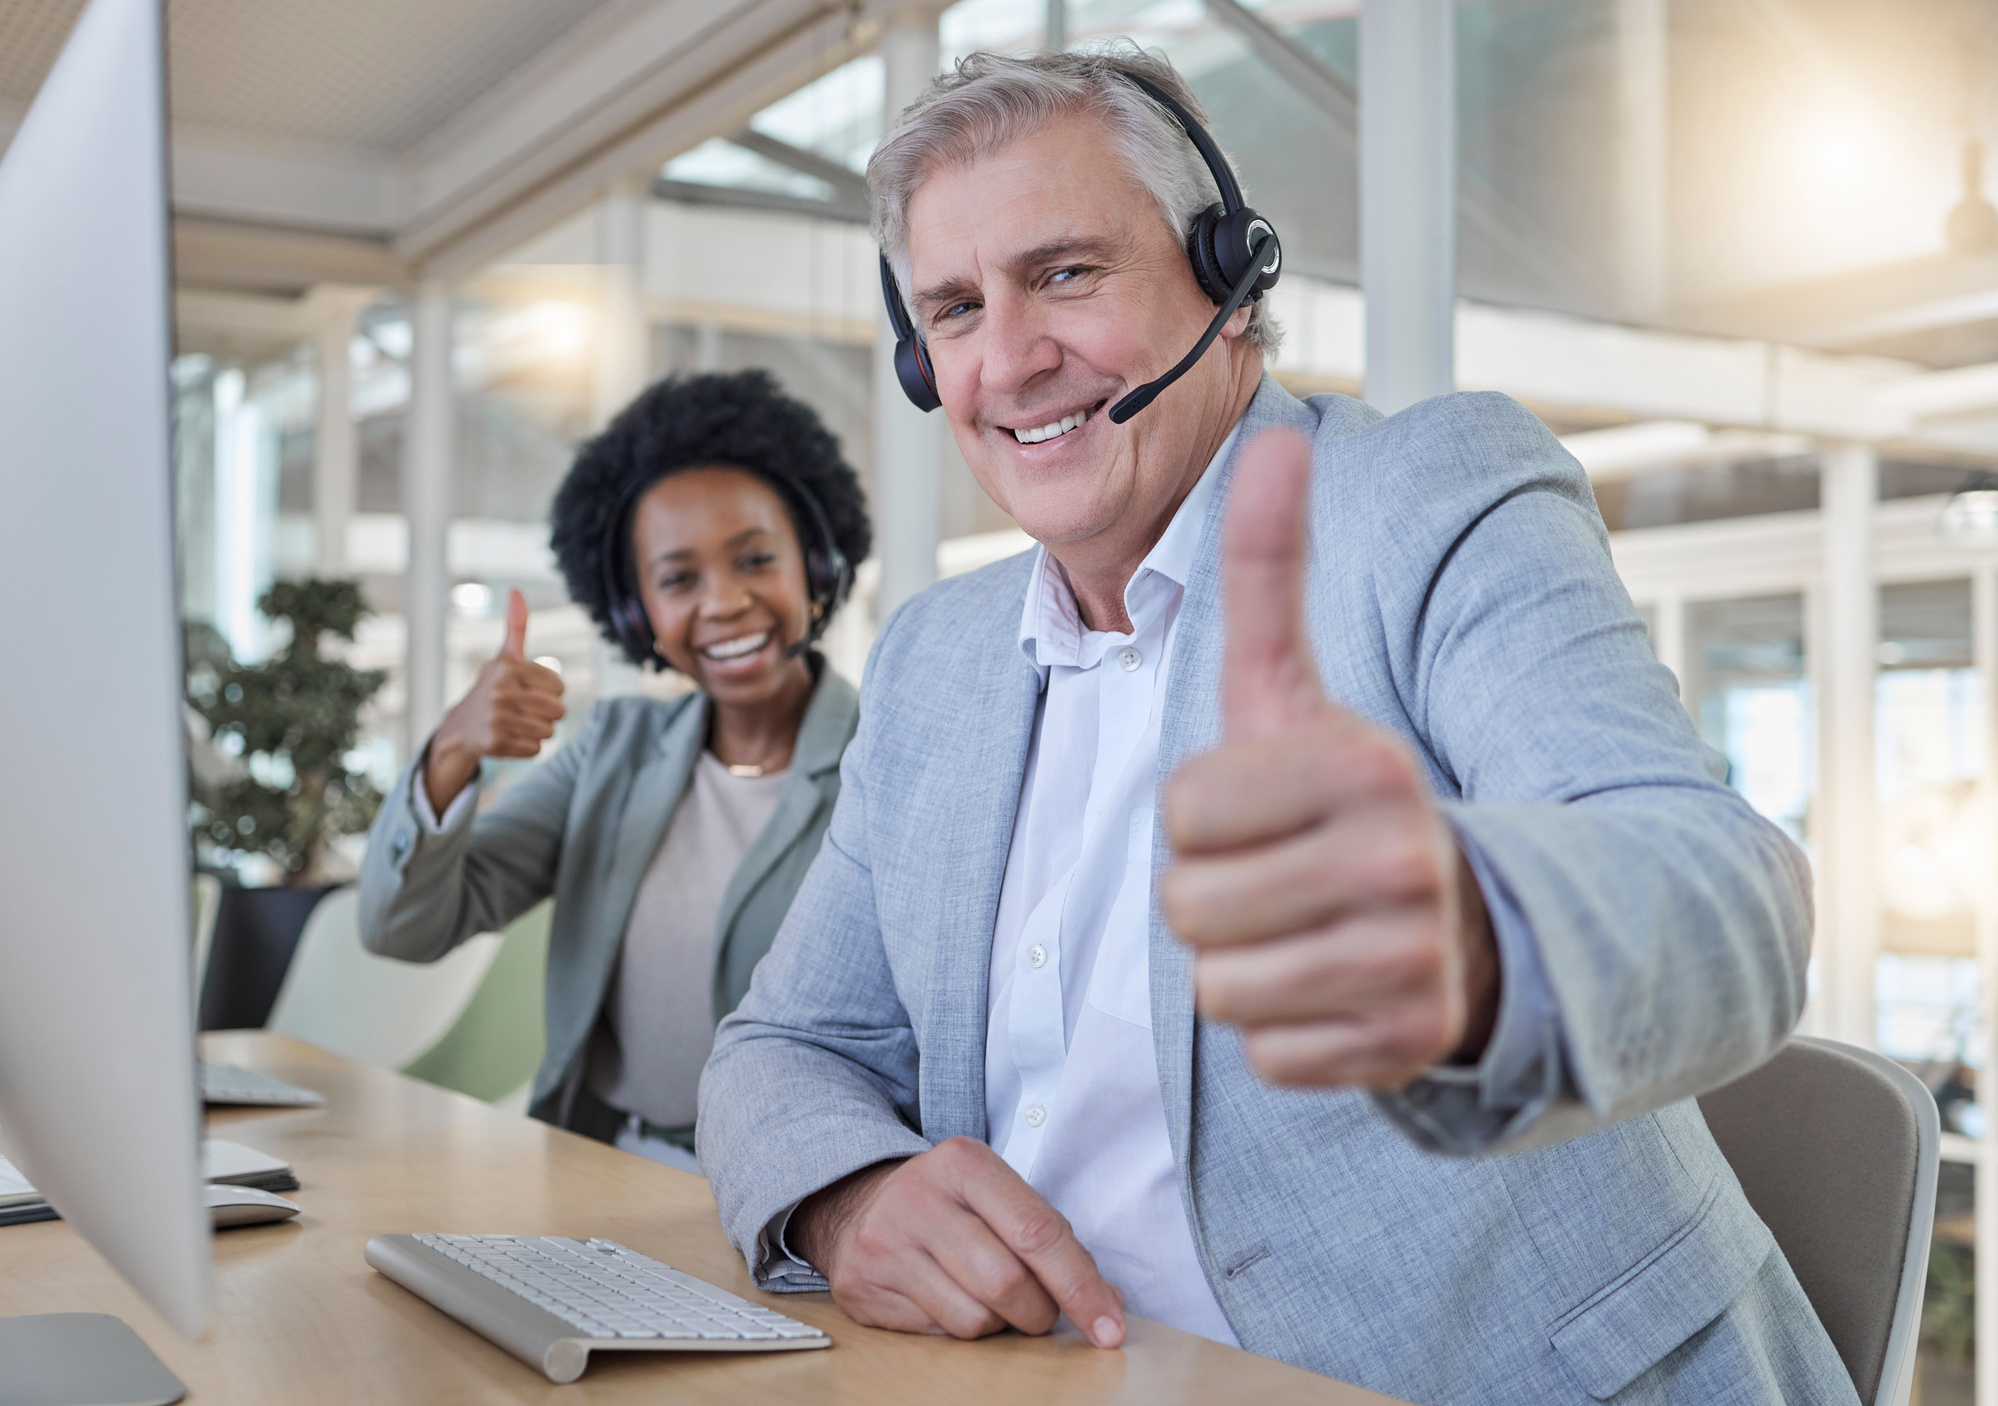 Customer Support, Thumbs up and Portrait of Call Center Employees Happy at Computer in Consulting Office. Help Desk, Smile and Mature Man with Black Woman at Advisory Agency for Crm Networking Online